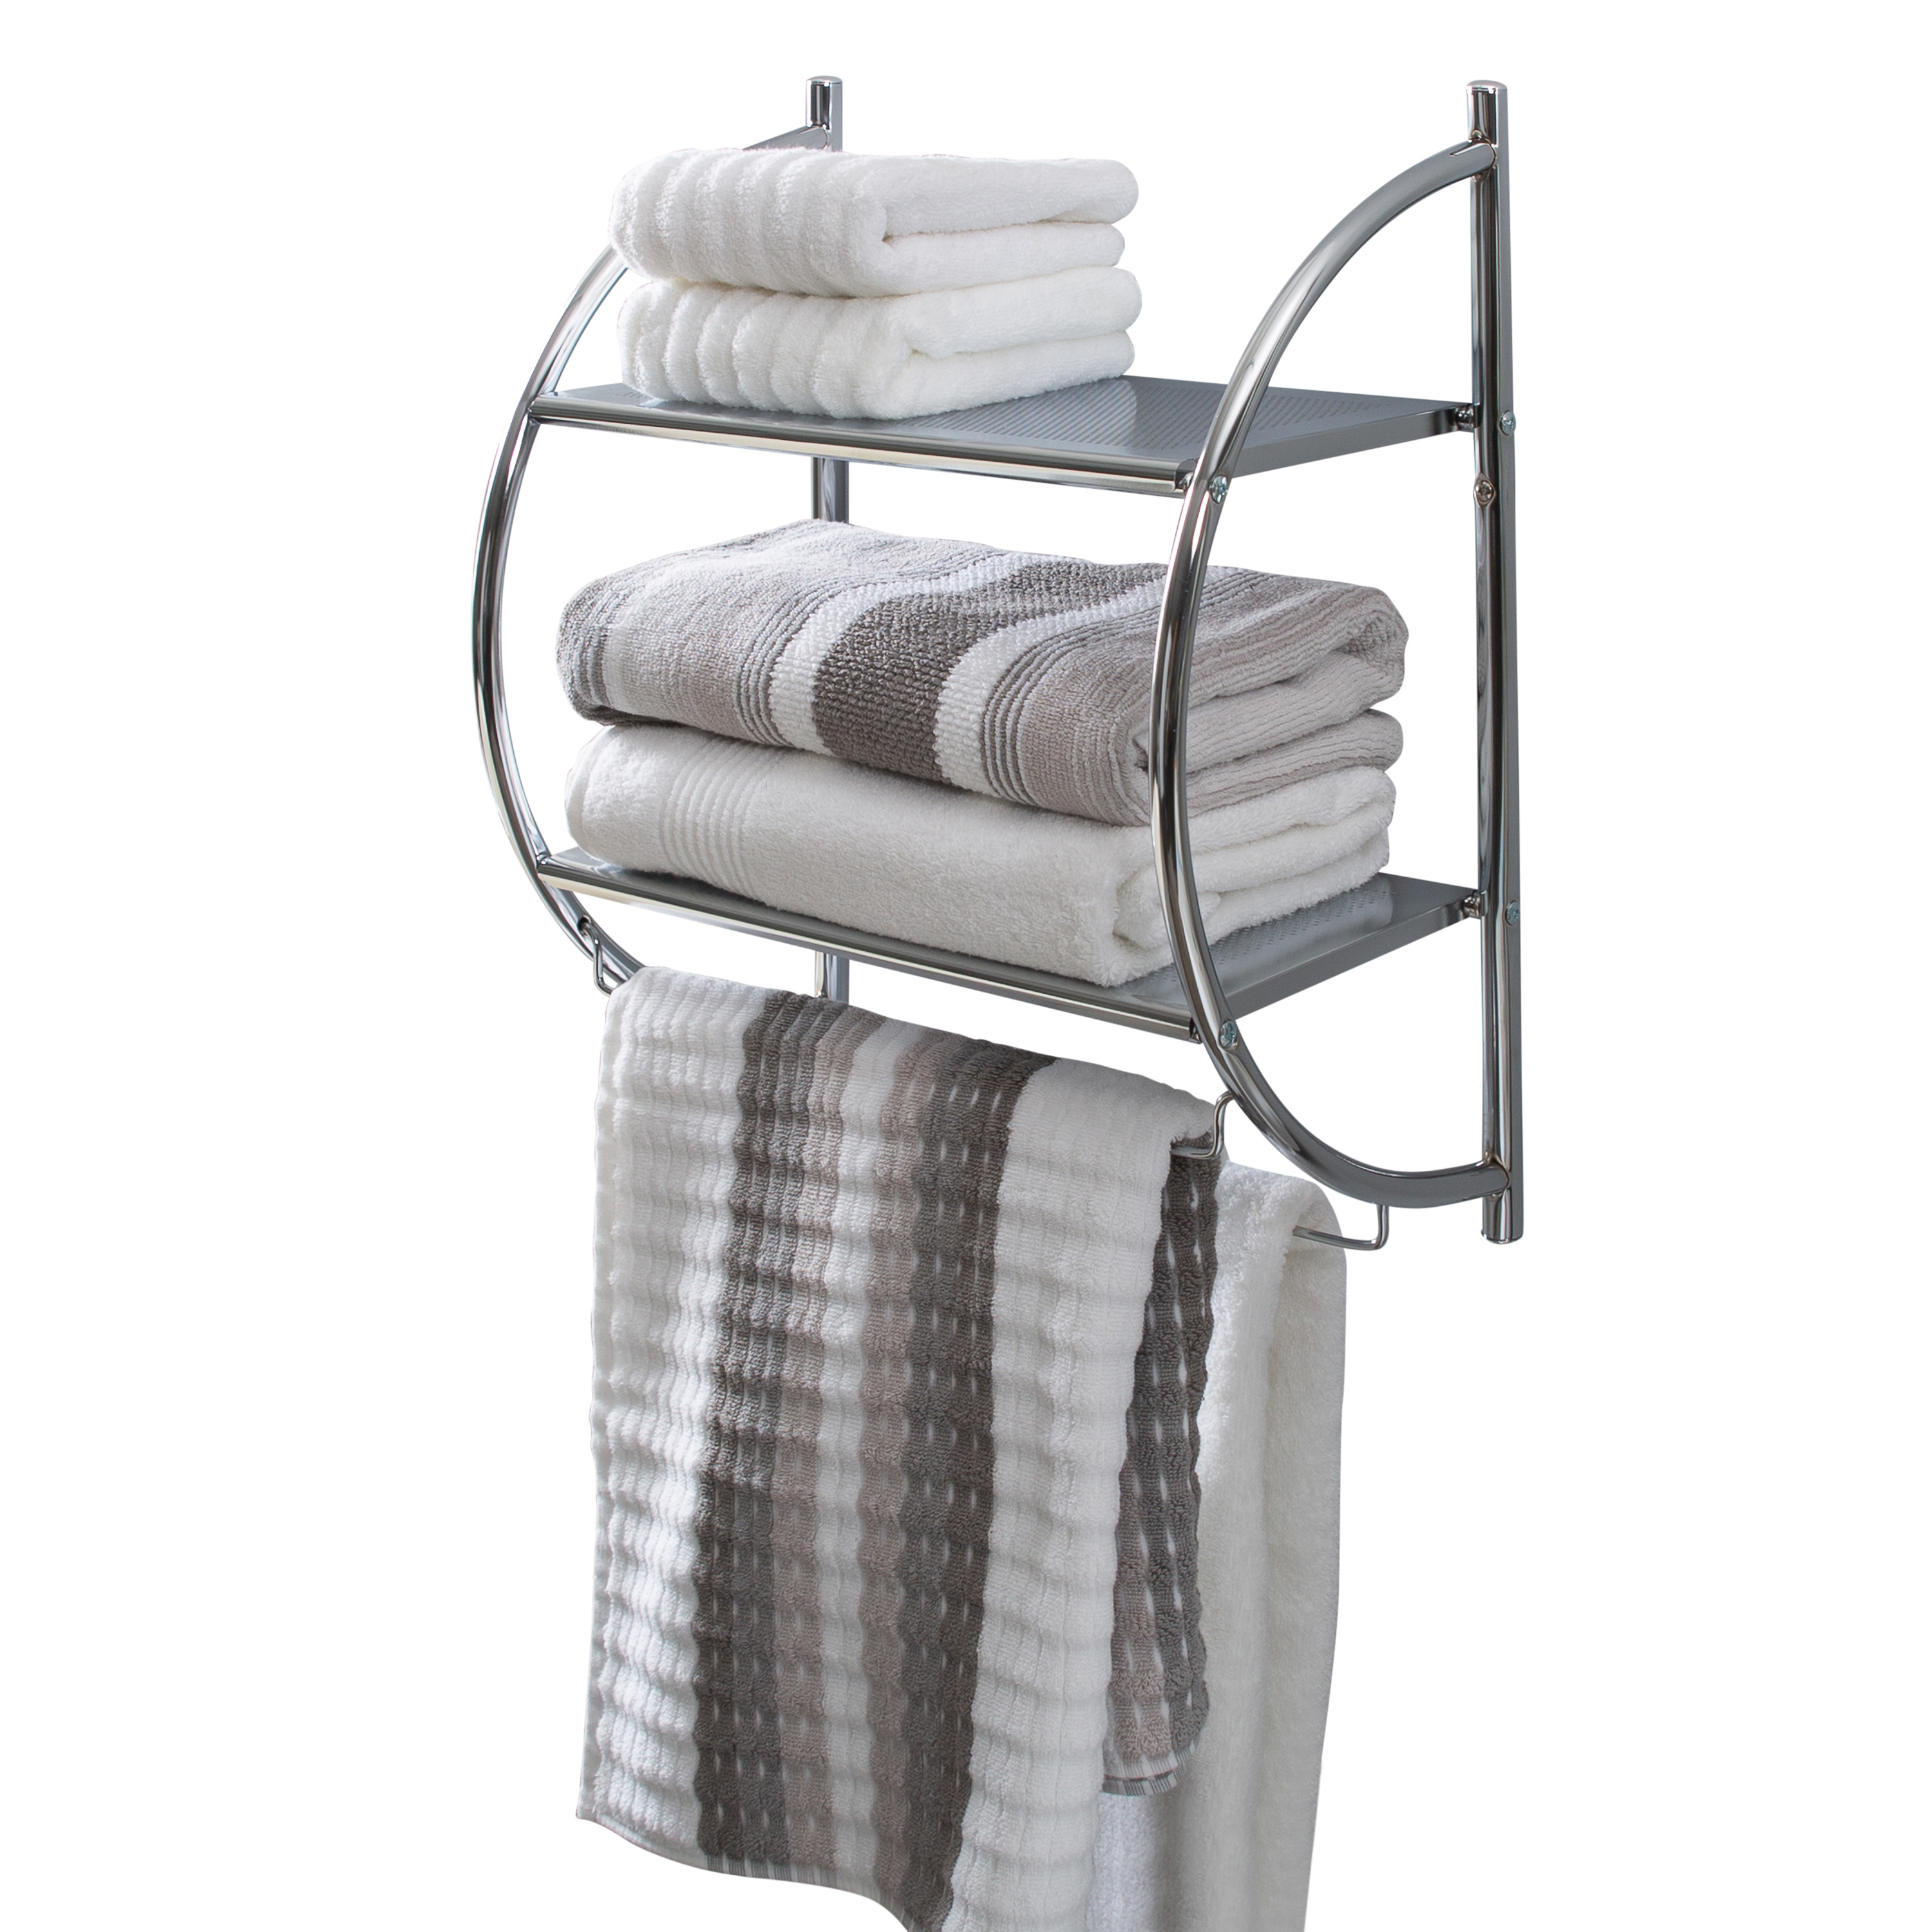 Organize It All 2 Tier Metal Wall Mount Shelf with Towel Bars, Chrome - image 5 of 7